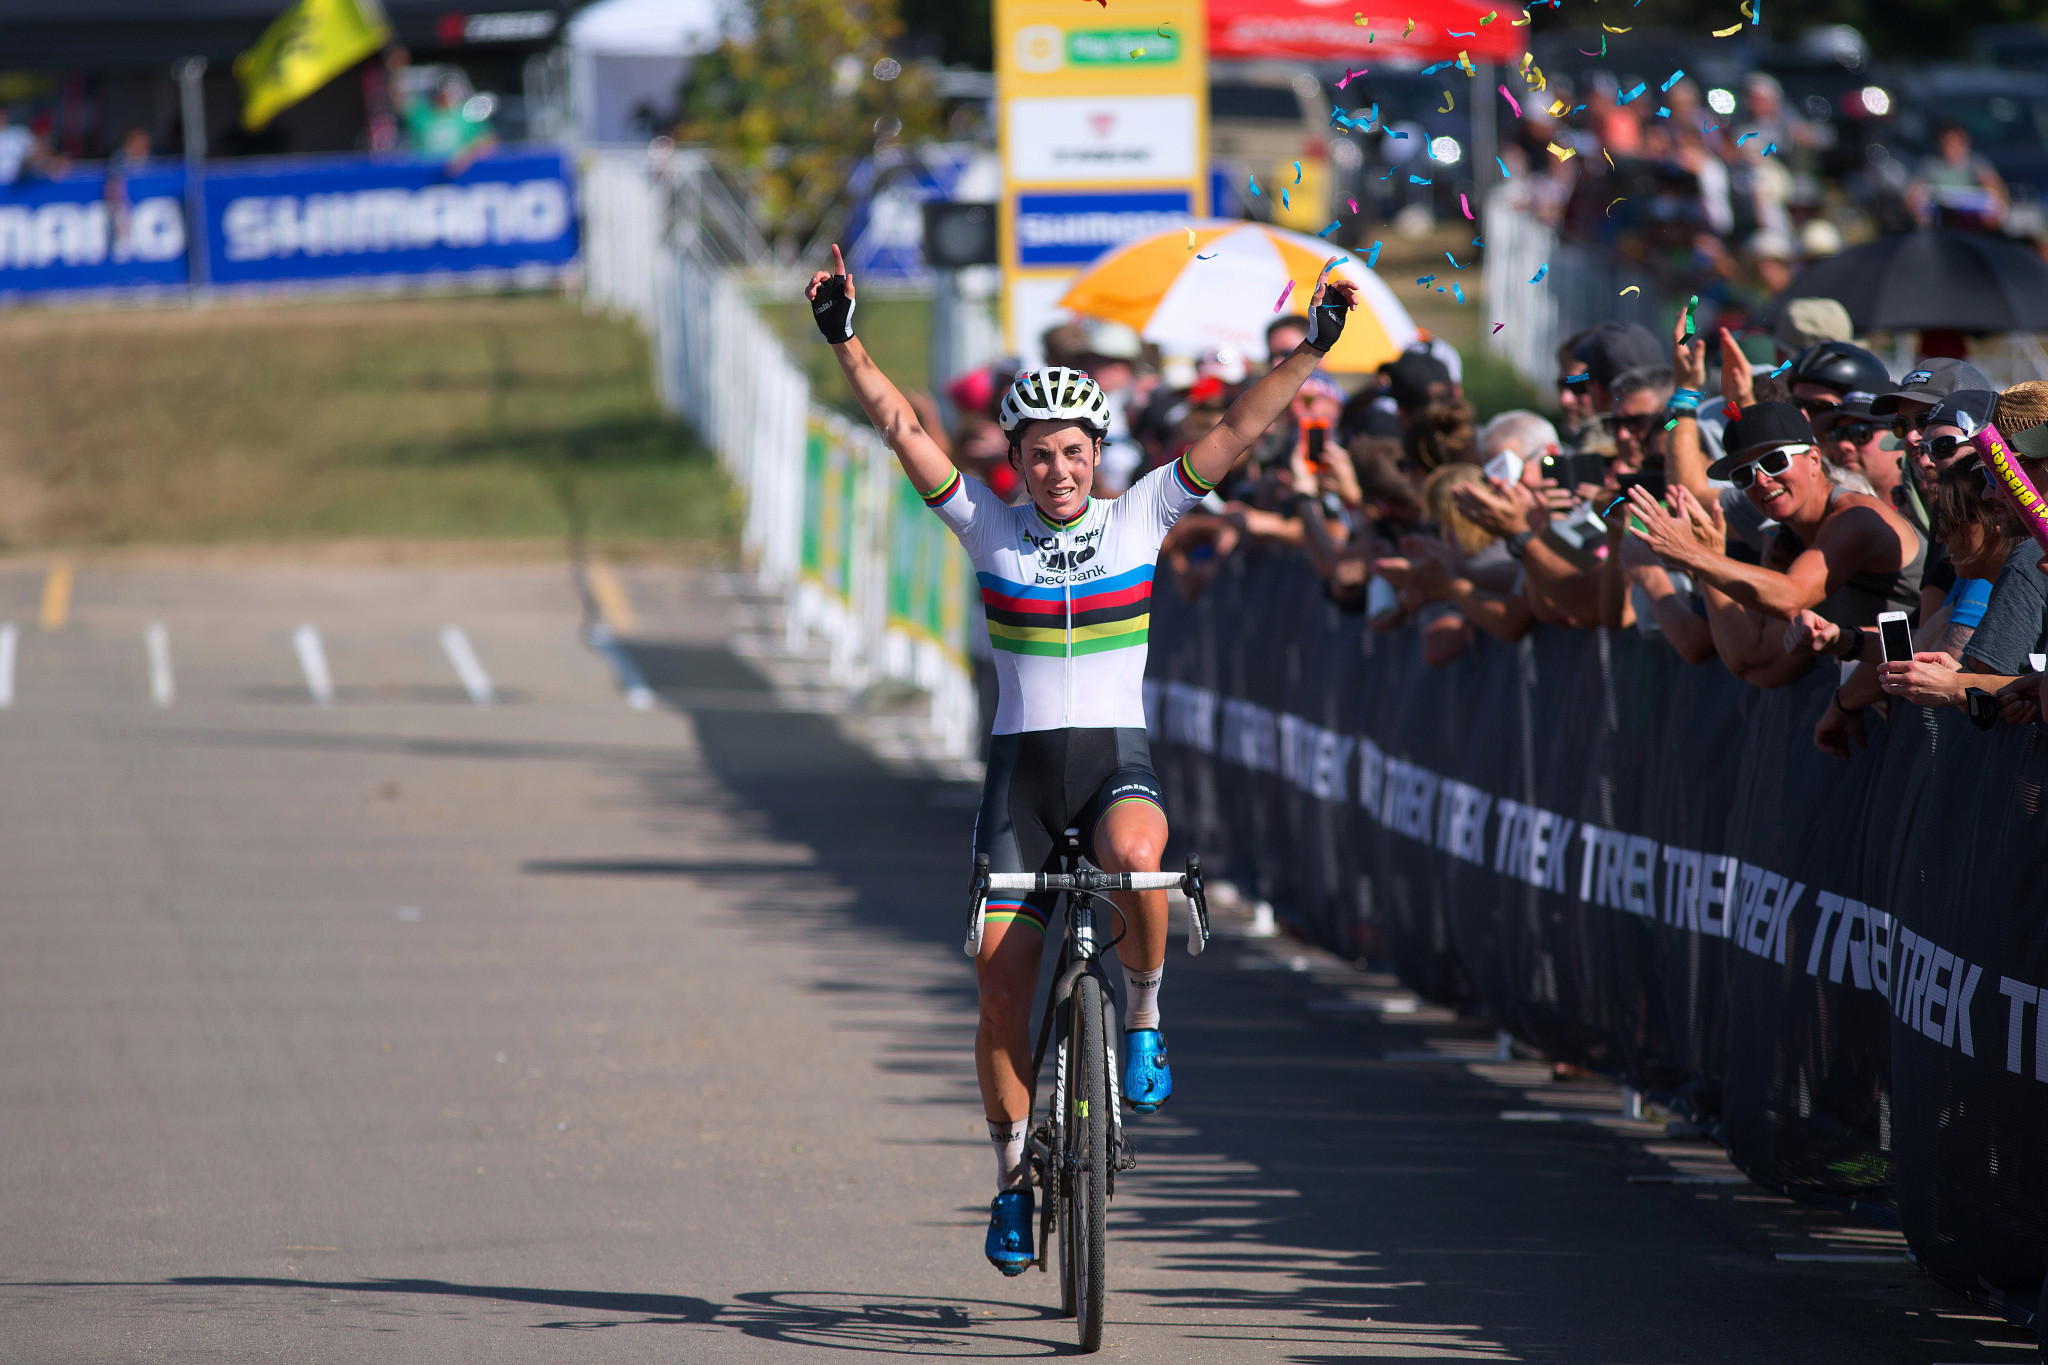 Belgium's Sanne Cant is currently second in the women's UCI Cyclo-Cross World Cup rankings ©Getty Images